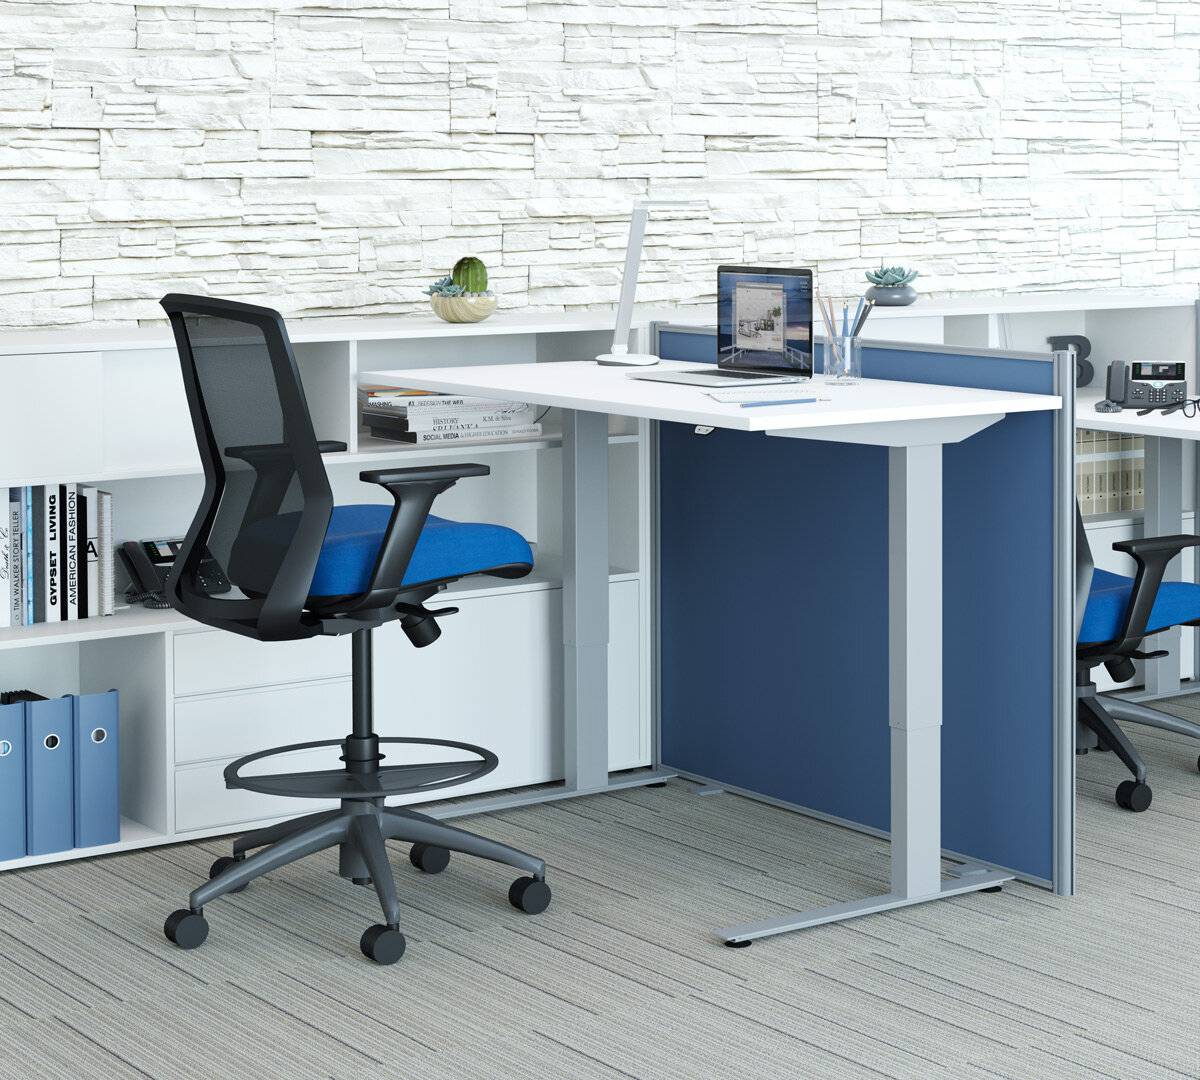 Height Adjustable Tables